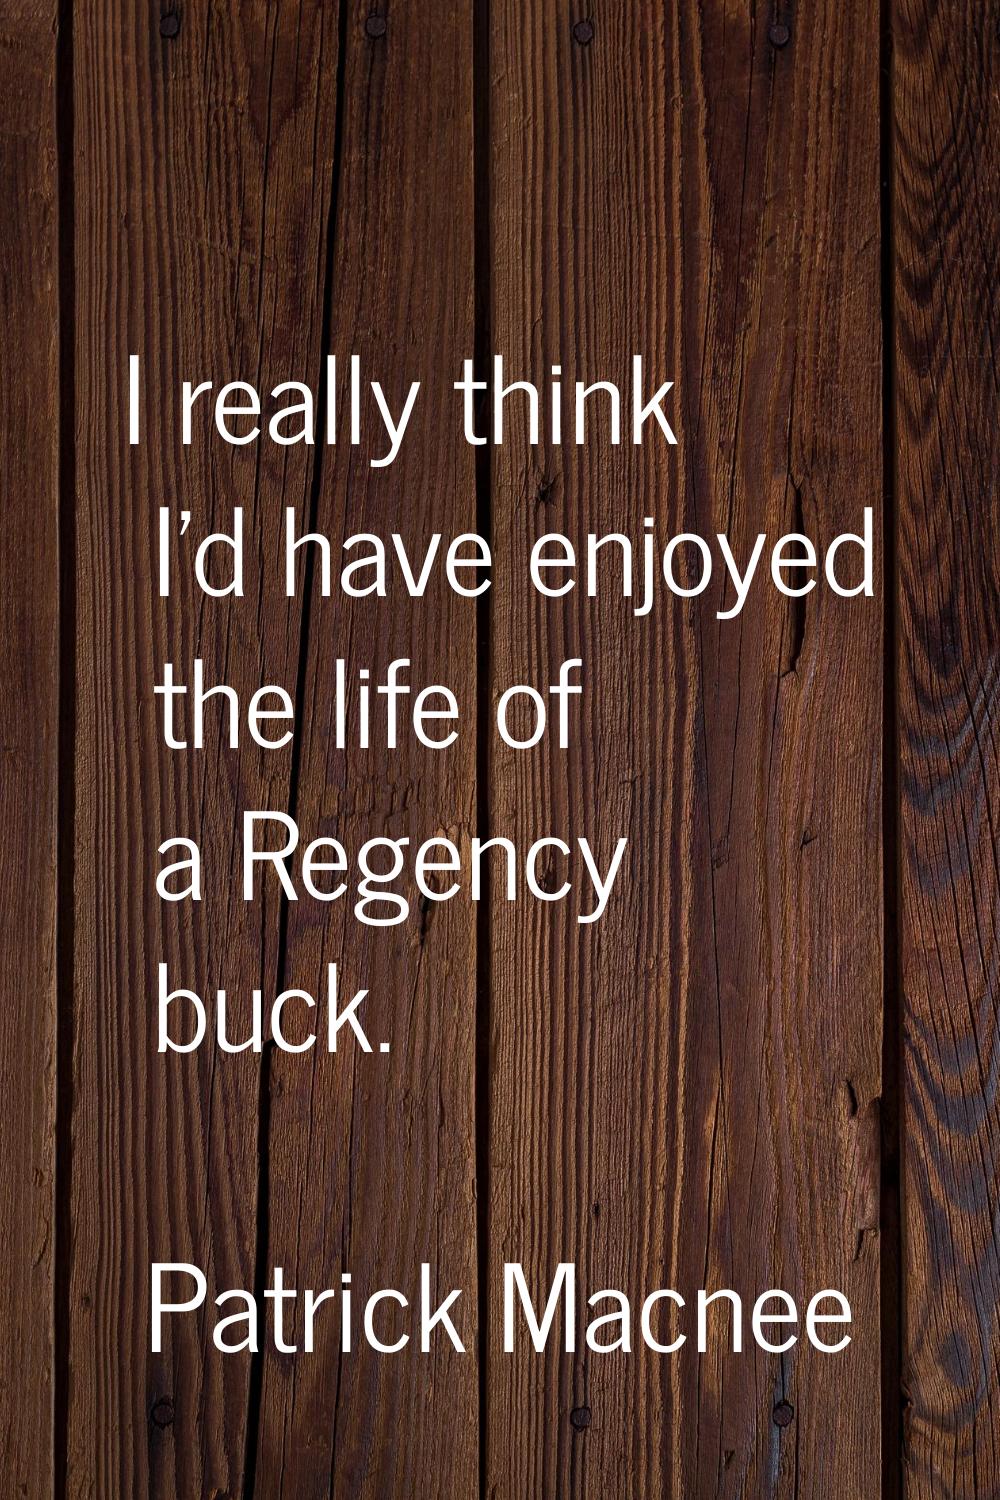 I really think I'd have enjoyed the life of a Regency buck.